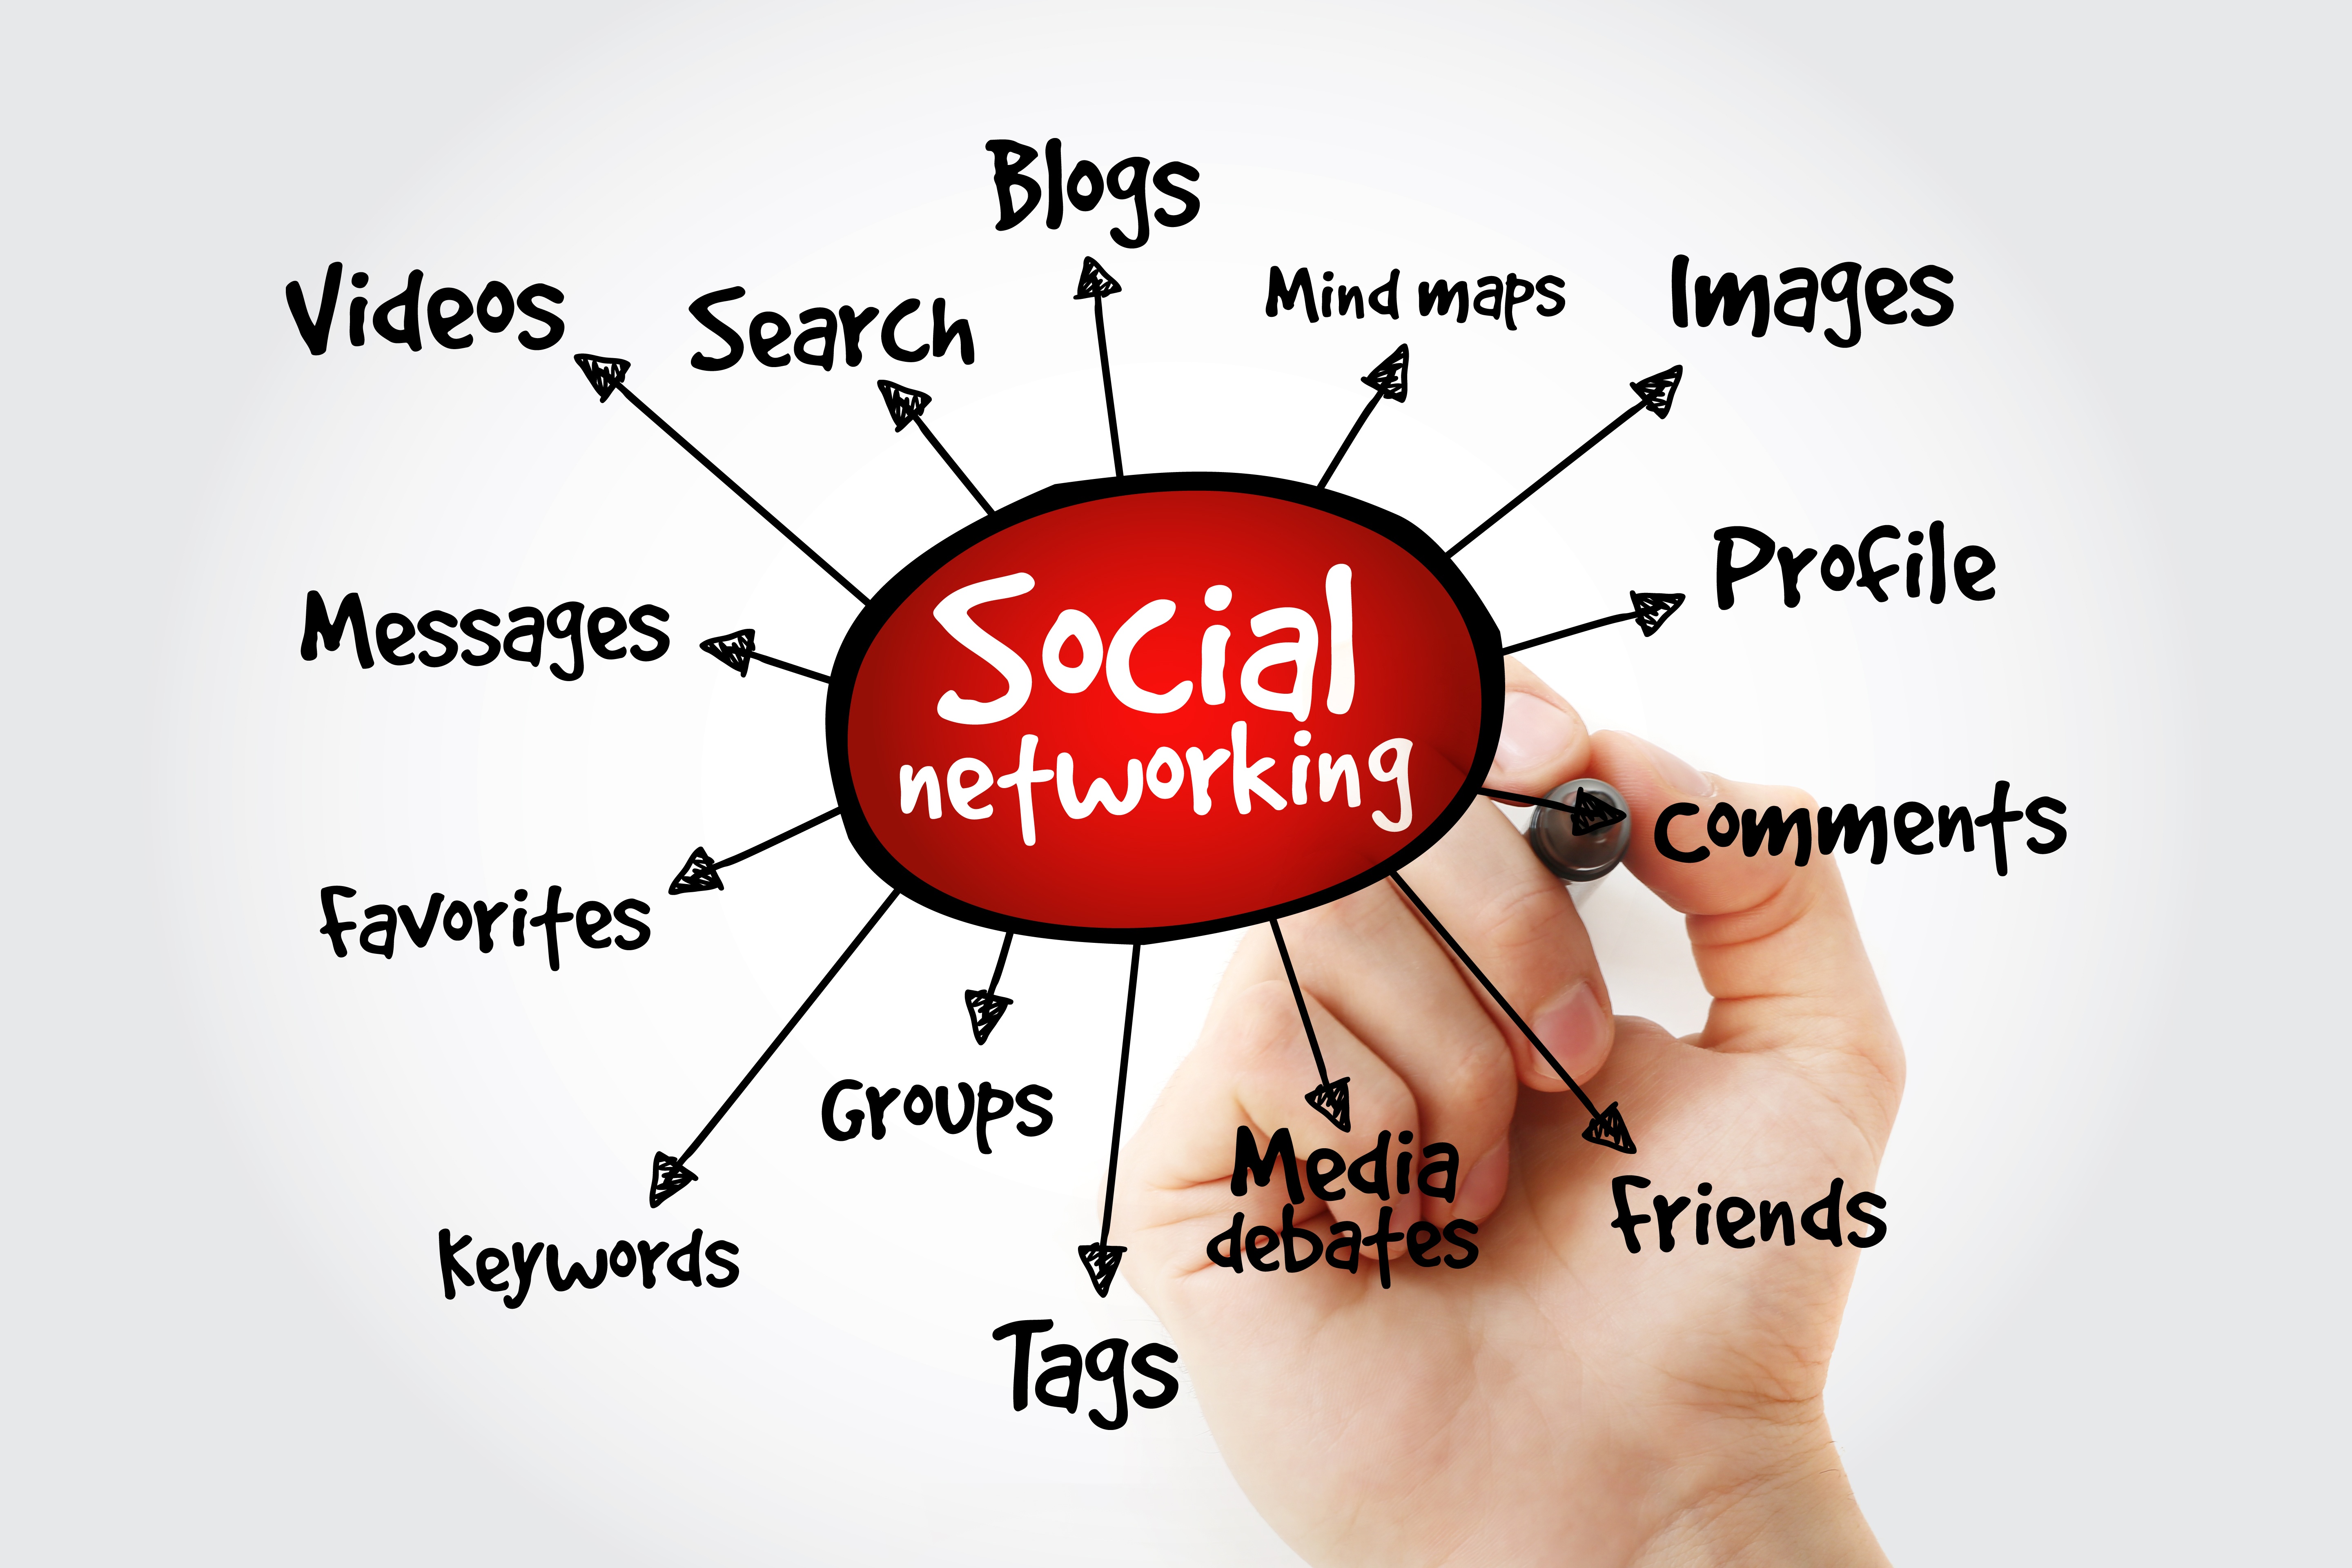 social bookmarking, networking, tags, profiles, accounts, friends, keywords, search, SEO